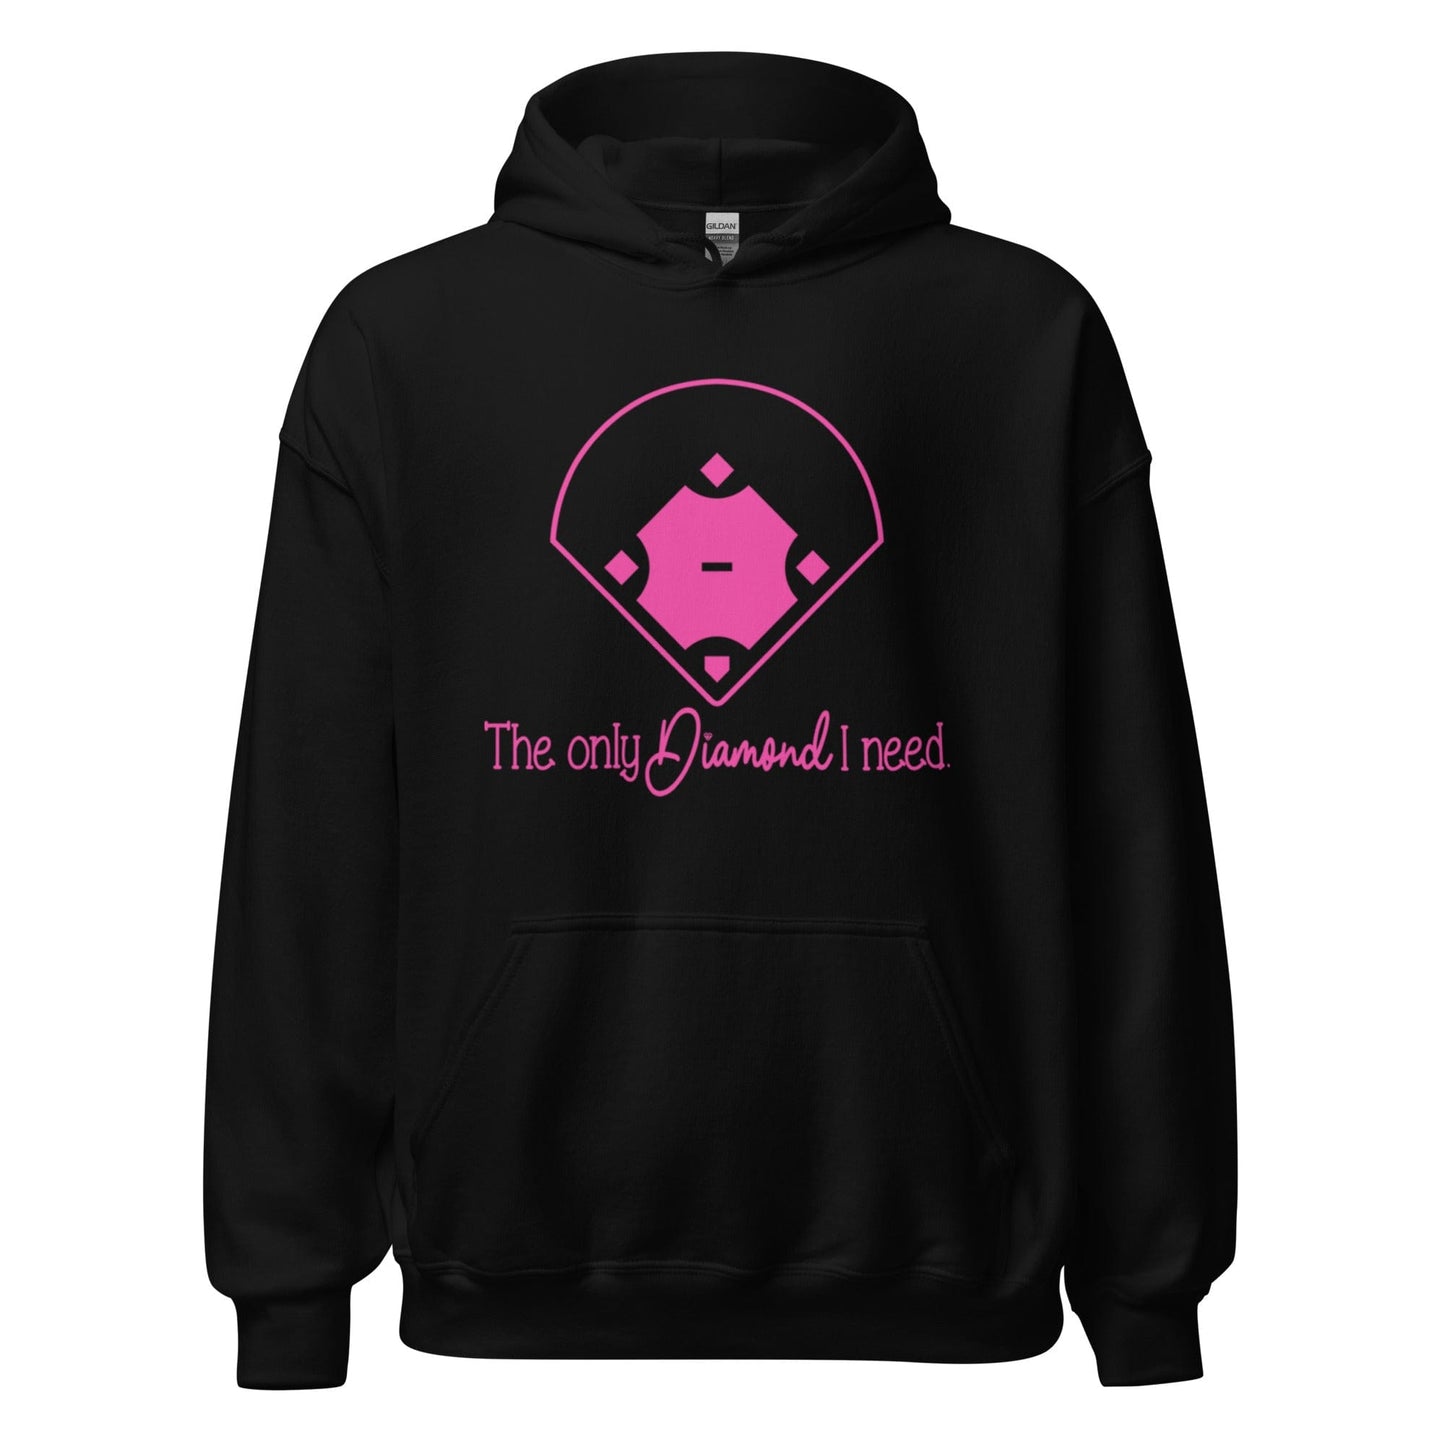 The Only Diamond I Need - Adult Hoodie